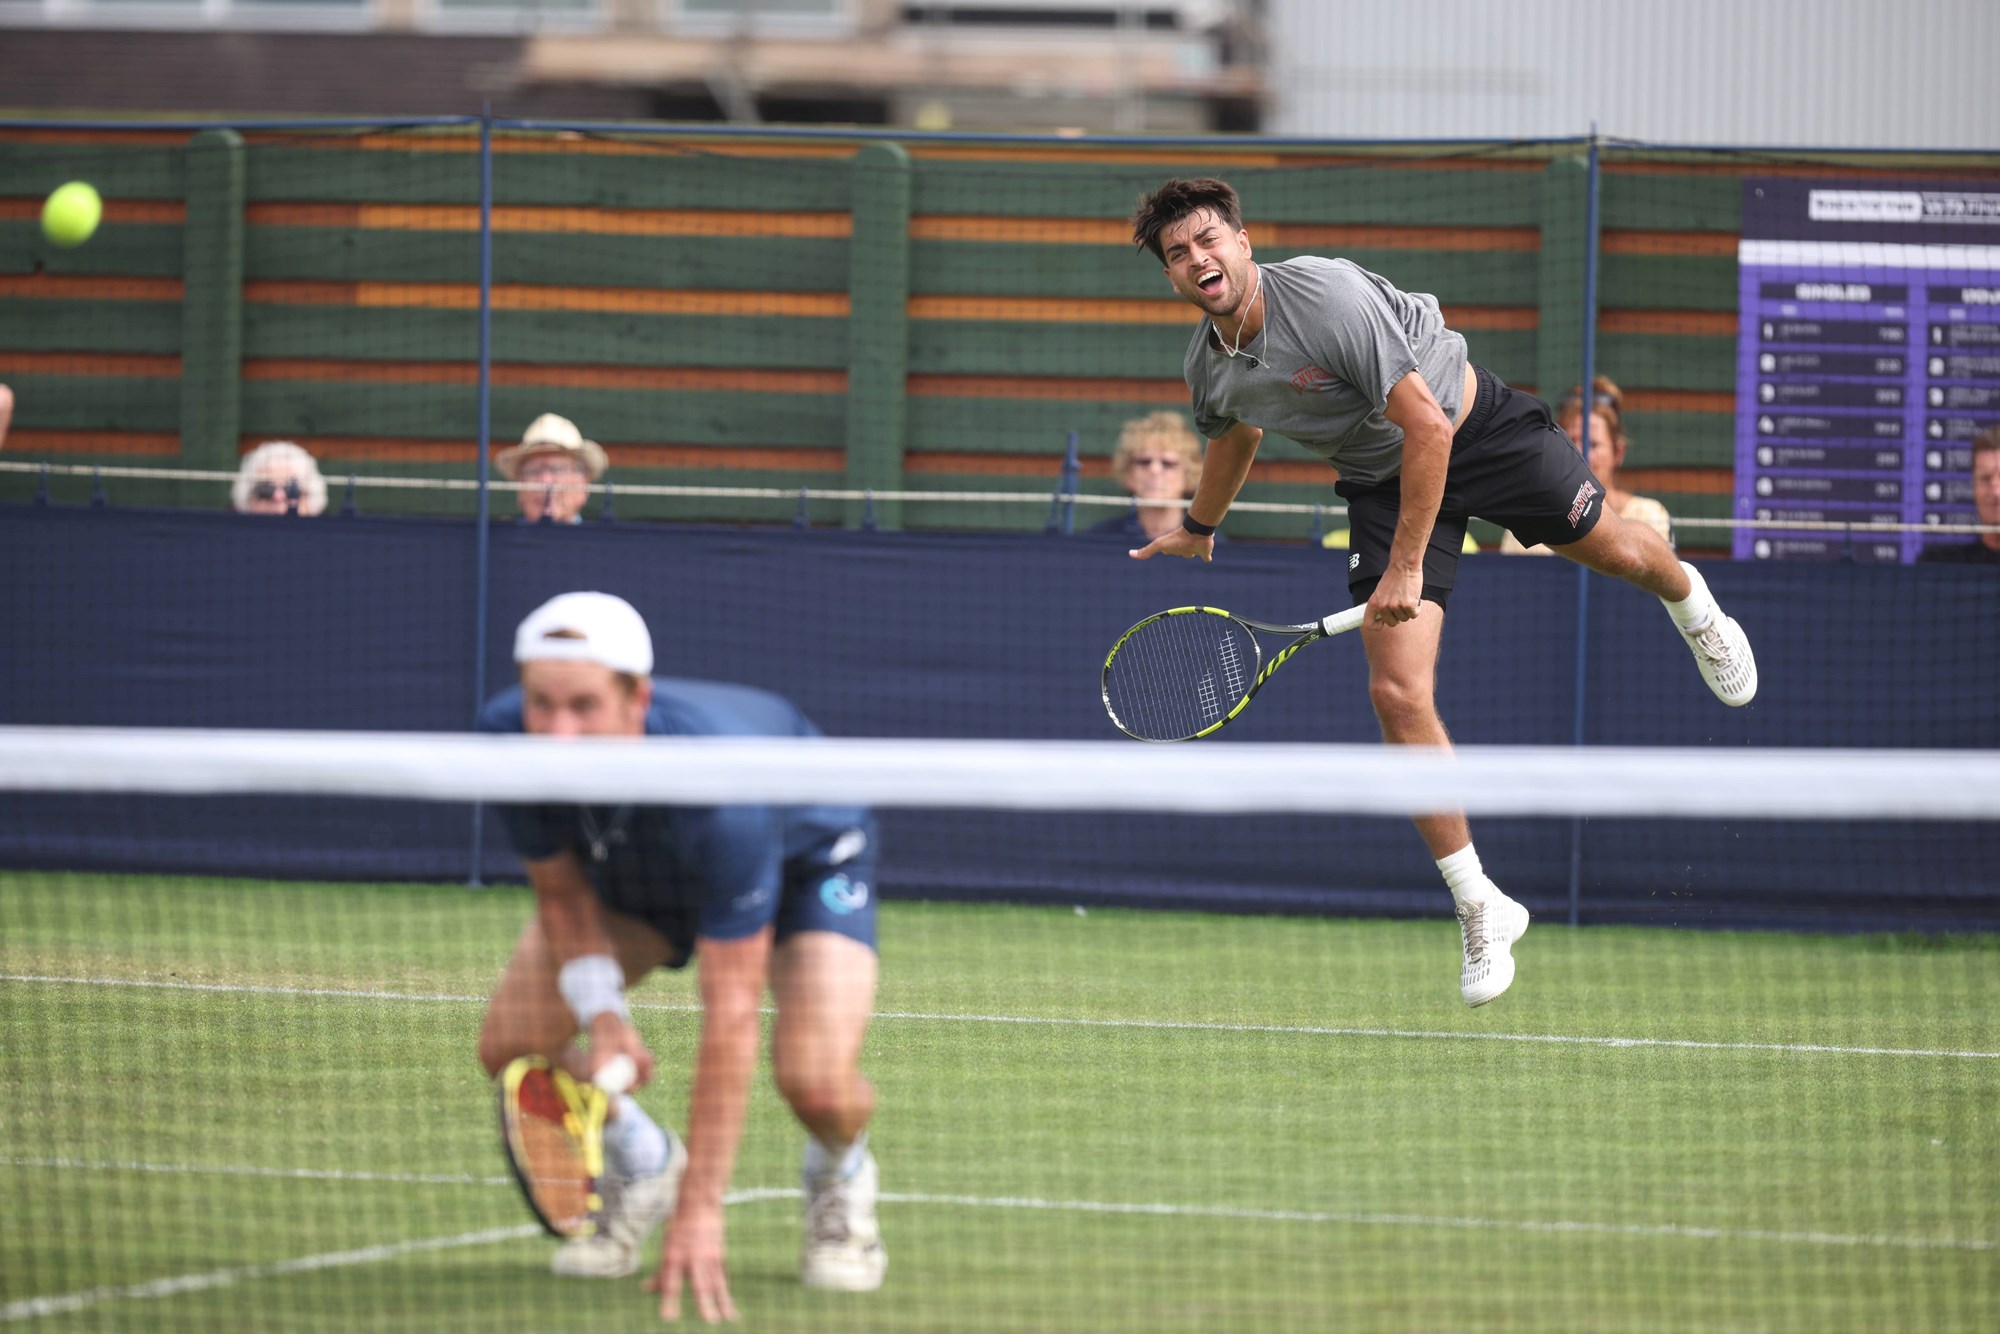 Male tennis player jumping in the air